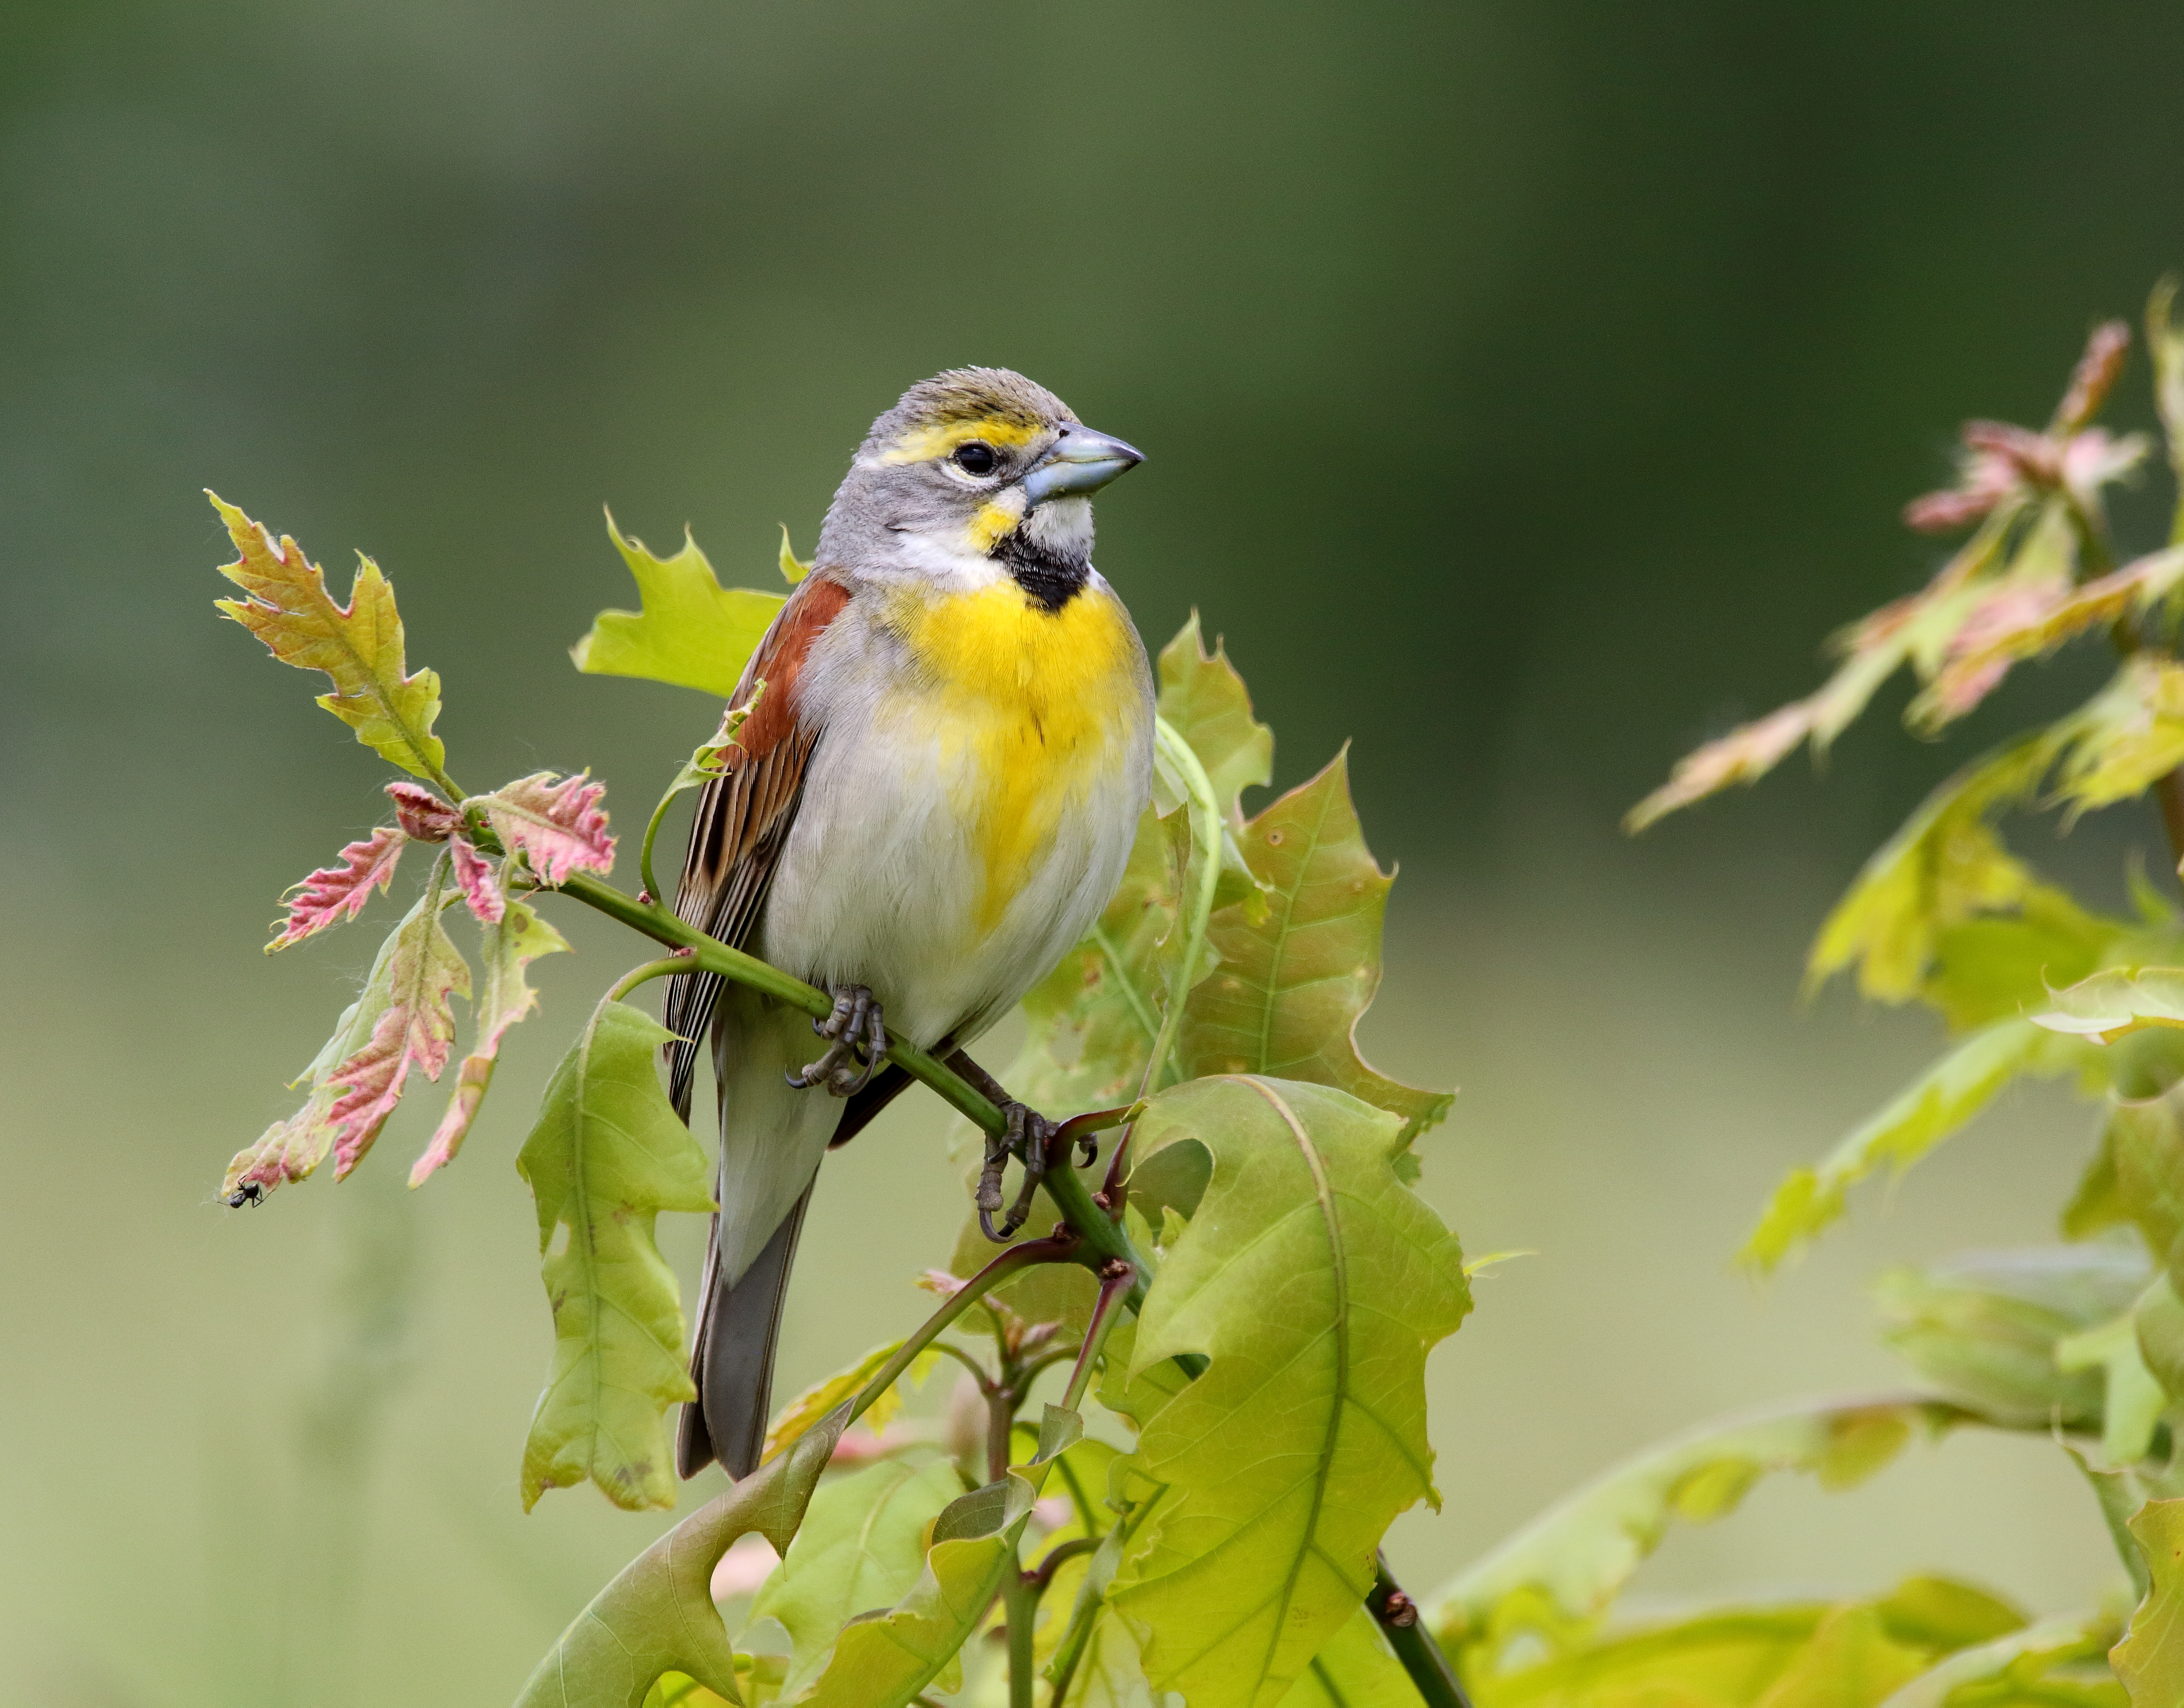 The Dickcissel is one of the more unusual migrants that has been spotted stopping over on Roosevelt Island during migration. Photo: <a href="https://www.flickr.com/photos/120553232@N02/" target="_blank">Isaac Grant</a>